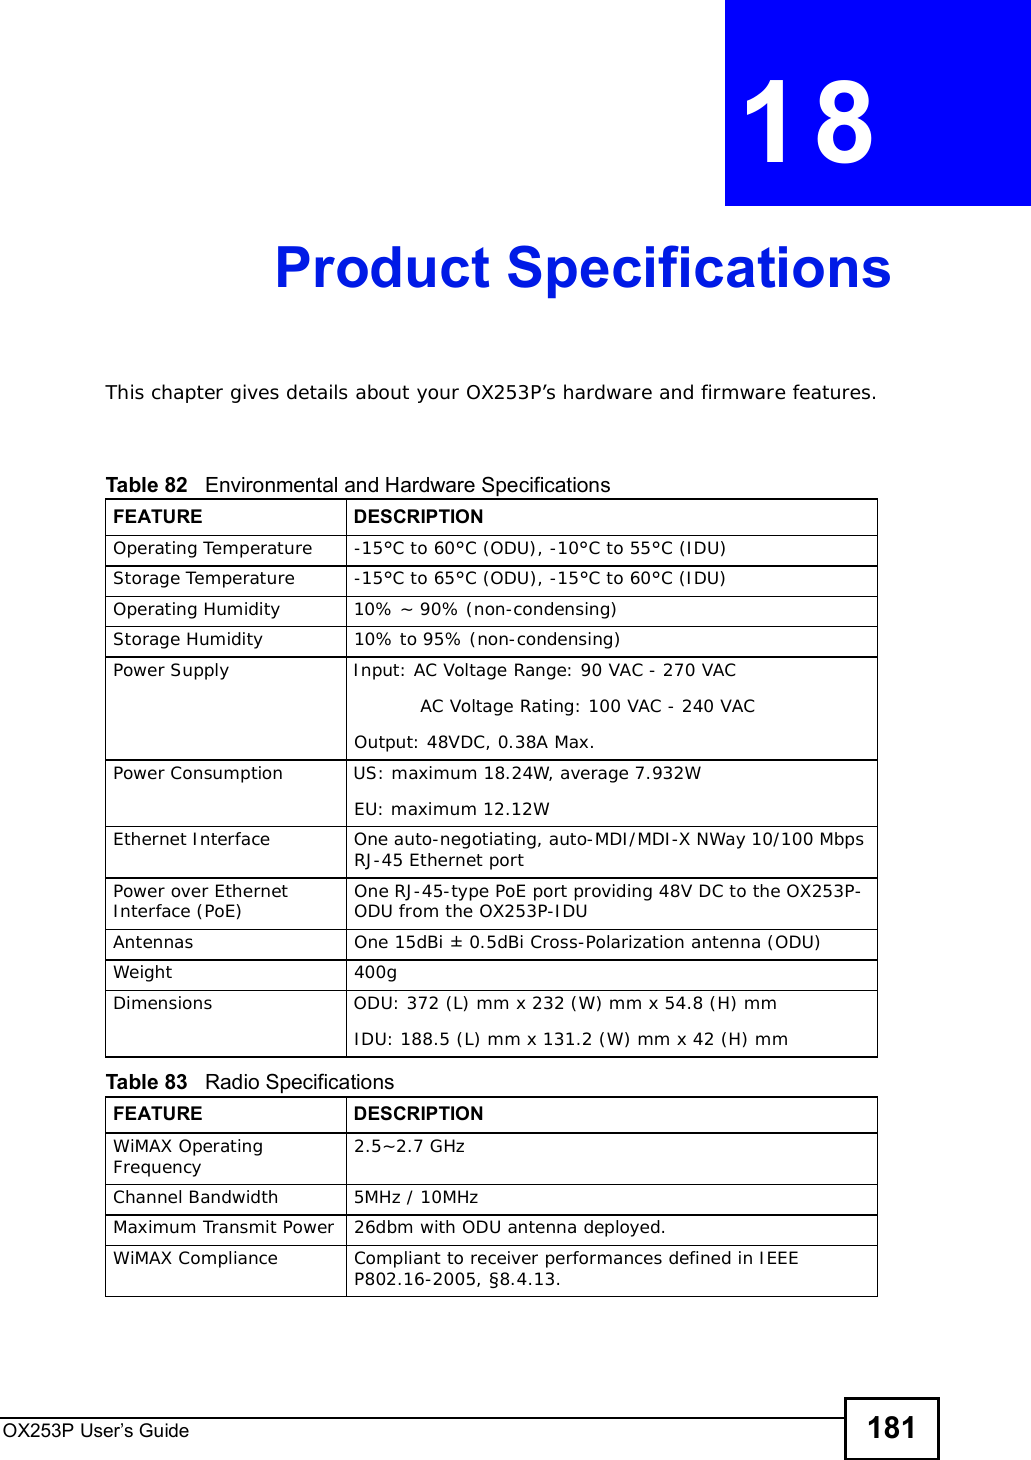 OX253P User’s Guide 181CHAPTER 18Product SpecificationsThis chapter gives details about your OX253P’s hardware and firmware features.                     Table 82   Environmental and Hardware SpecificationsFEATUREDESCRIPTIONOperating Temperature-15°C to 60°C (ODU), -10°C to 55°C (IDU)Storage Temperature-15°C to 65°C (ODU), -15°C to 60°C (IDU)Operating Humidity10% ~ 90% (non-condensing)Storage Humidity 10% to 95% (non-condensing)Power SupplyInput: AC Voltage Range: 90 VAC - 270 VAC           AC Voltage Rating: 100 VAC - 240 VACOutput: 48VDC, 0.38A Max.Power ConsumptionUS: maximum 18.24W, average 7.932WEU: maximum 12.12WEthernet InterfaceOne auto-negotiating, auto-MDI/MDI-X NWay 10/100 Mbps RJ-45 Ethernet portPower over Ethernet Interface (PoE) One RJ-45-type PoE port providing 48V DC to the OX253P-ODU from the OX253P-IDUAntennasOne 15dBi ± 0.5dBi Cross-Polarization antenna (ODU)Weight400gDimensionsODU: 372 (L) mm x 232 (W) mm x 54.8 (H) mmIDU: 188.5 (L) mm x 131.2 (W) mm x 42 (H) mmTable 83   Radio SpecificationsFEATUREDESCRIPTIONWiMAX Operating Frequency 2.5~2.7 GHzChannel Bandwidth5MHz / 10MHzMaximum Transmit Power26dbm with ODU antenna deployed.WiMAX ComplianceCompliant to receiver performances defined in IEEE P802.16-2005, §8.4.13.